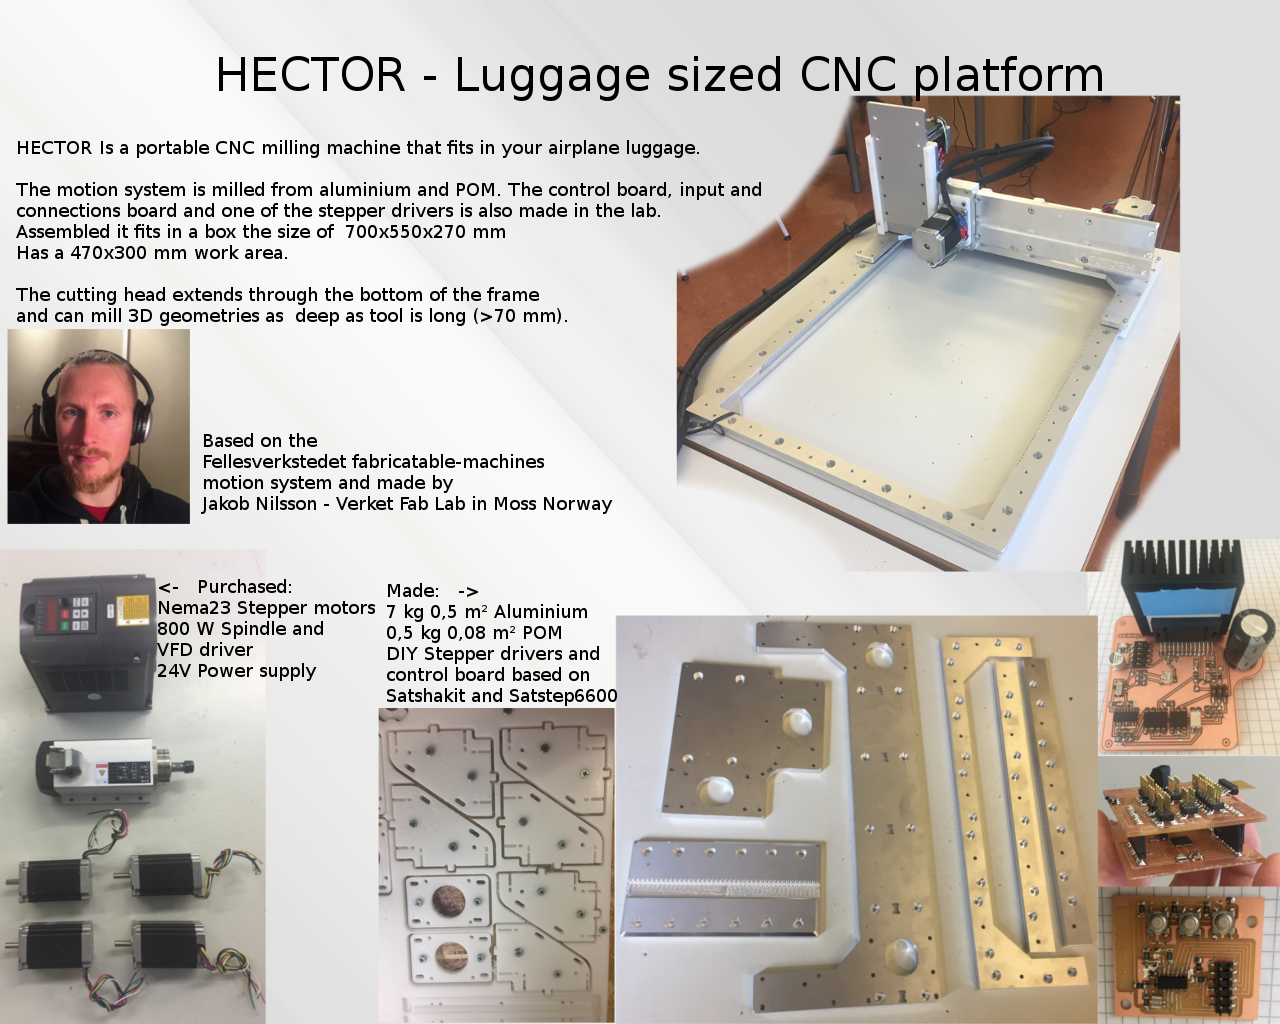 HECTOR CNC machine, by Jakob Nielsen